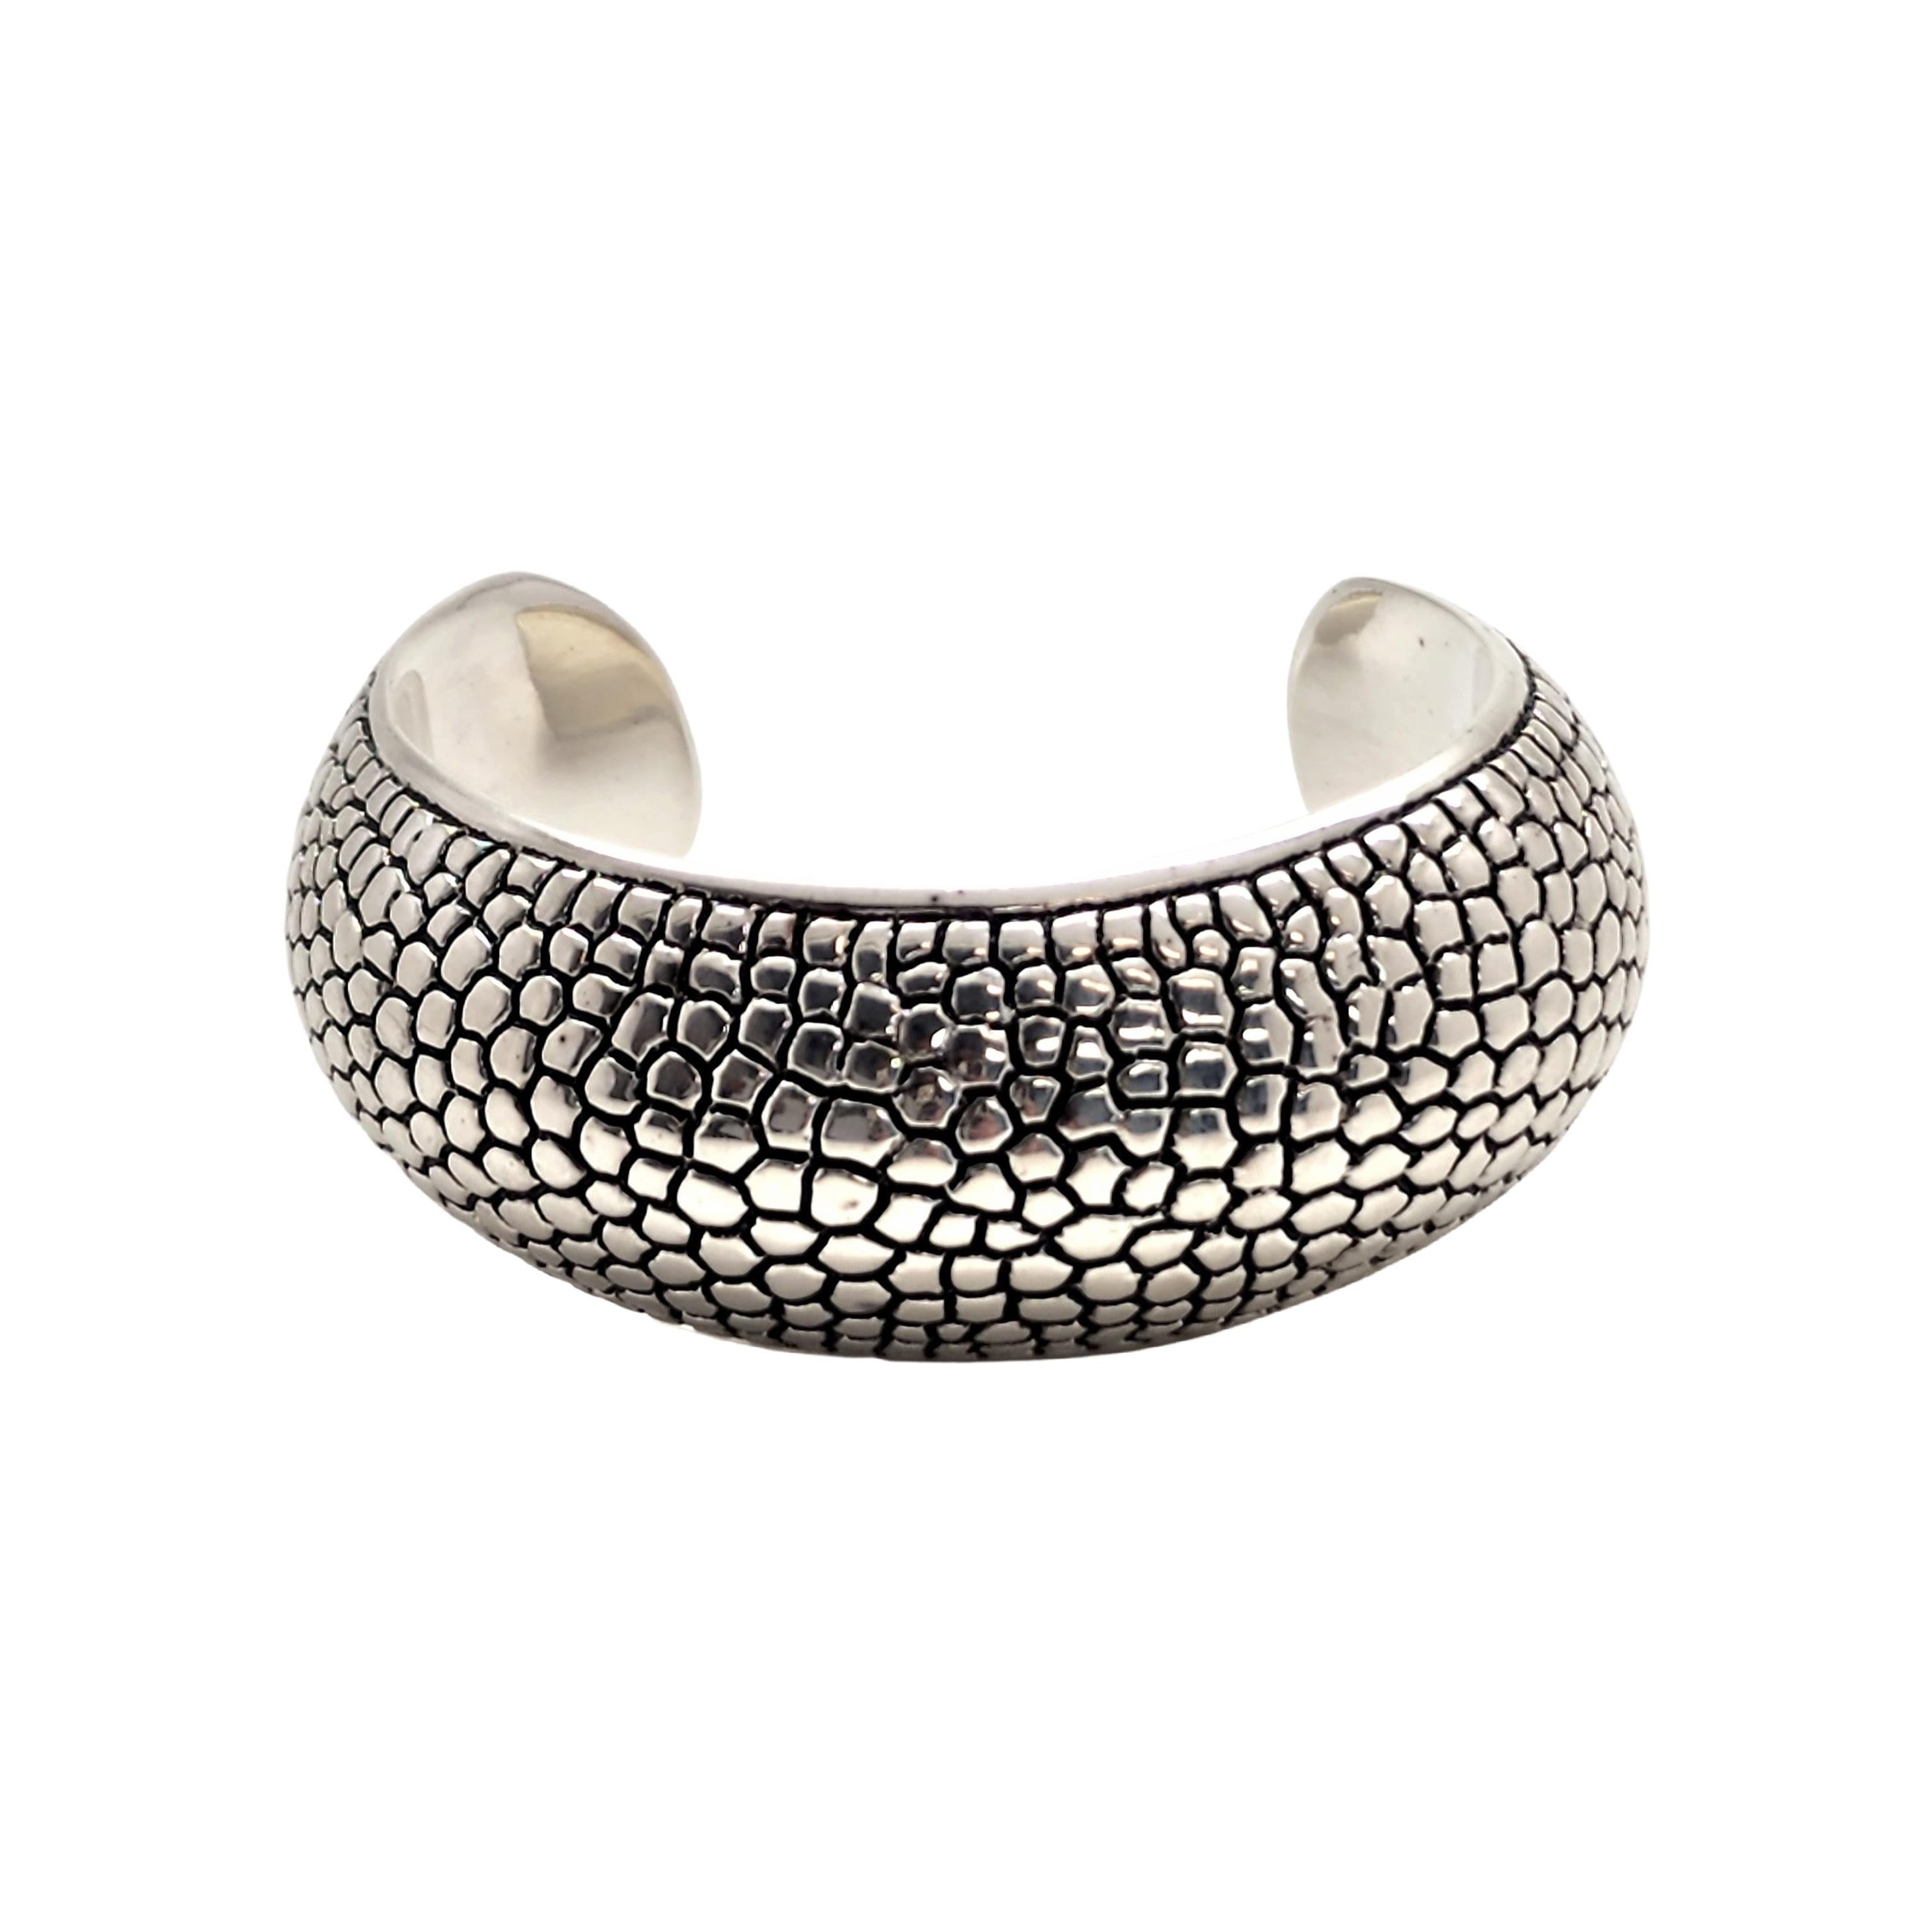 Sterling silver pebble cuff bracelet by designer Airess.

Beautiful pebble design on a wide and puffy cuff bracelet.

Measures approx 5 1/2